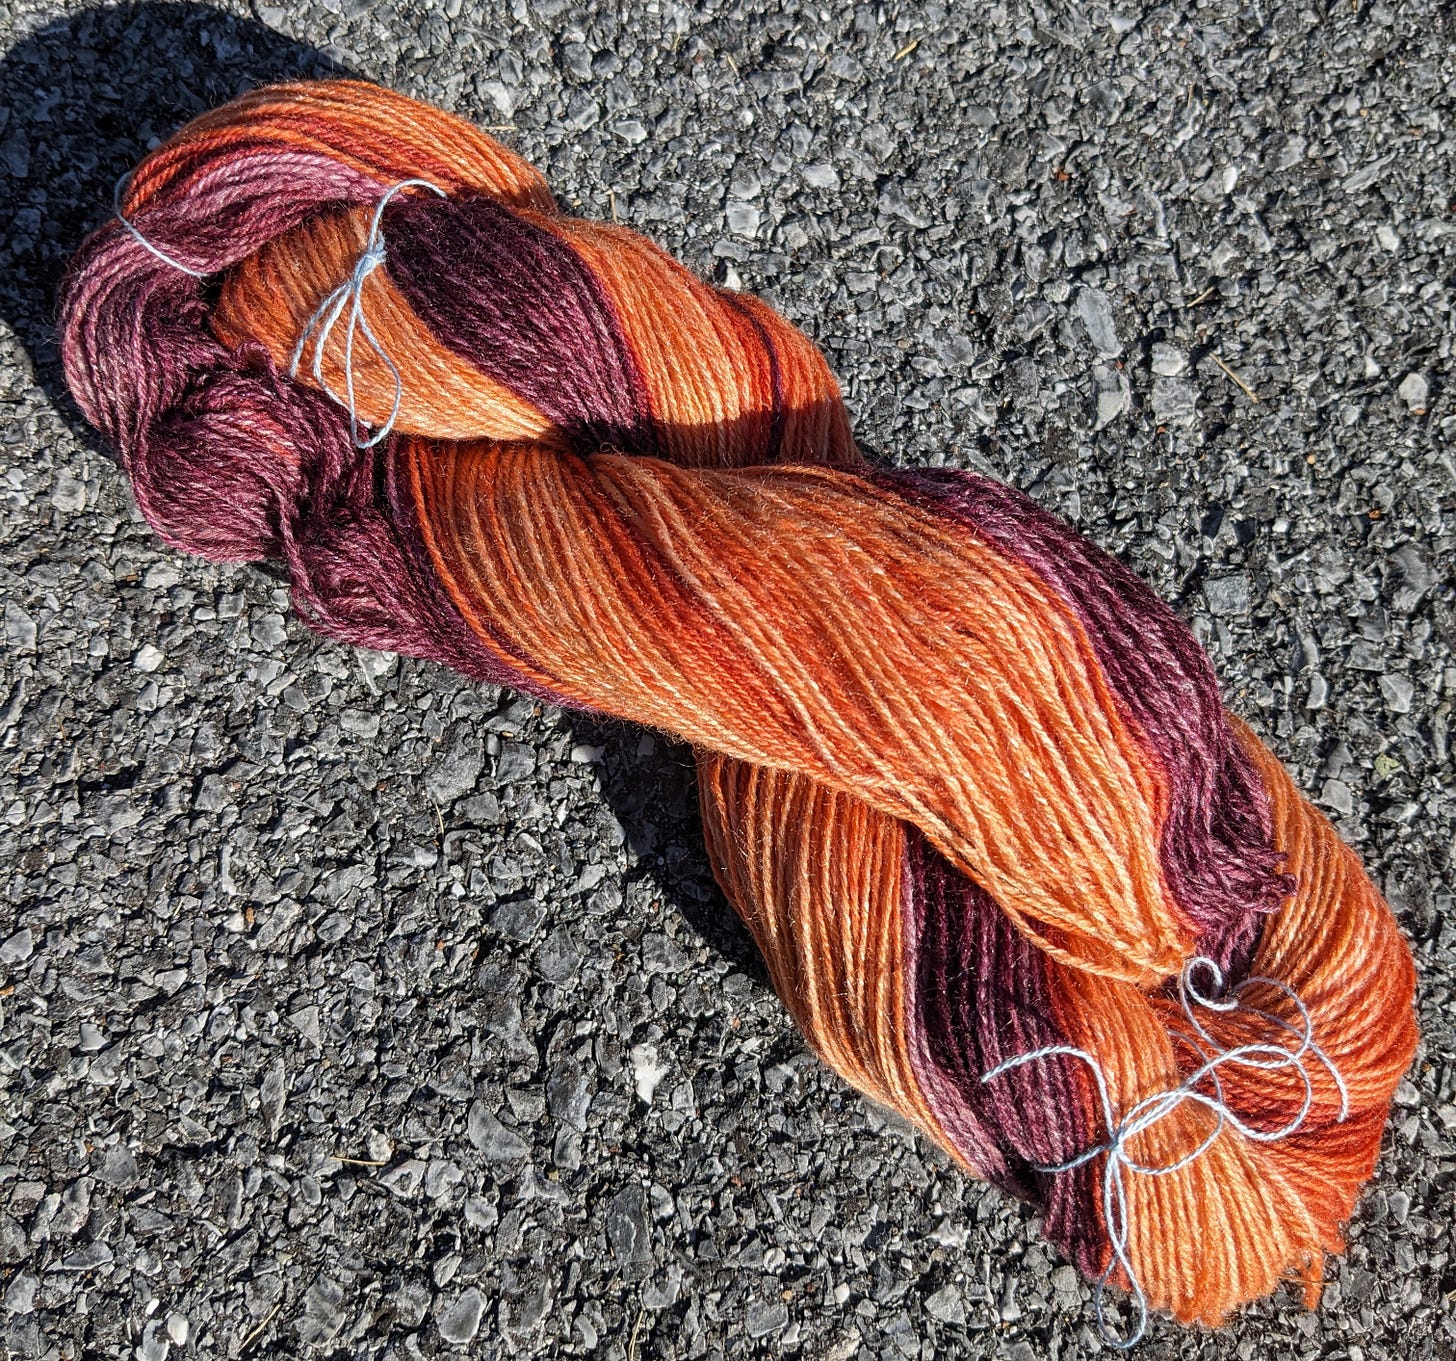 A photograph of a skein of yarn that fades from a bright peachy orange to a deep red-purple